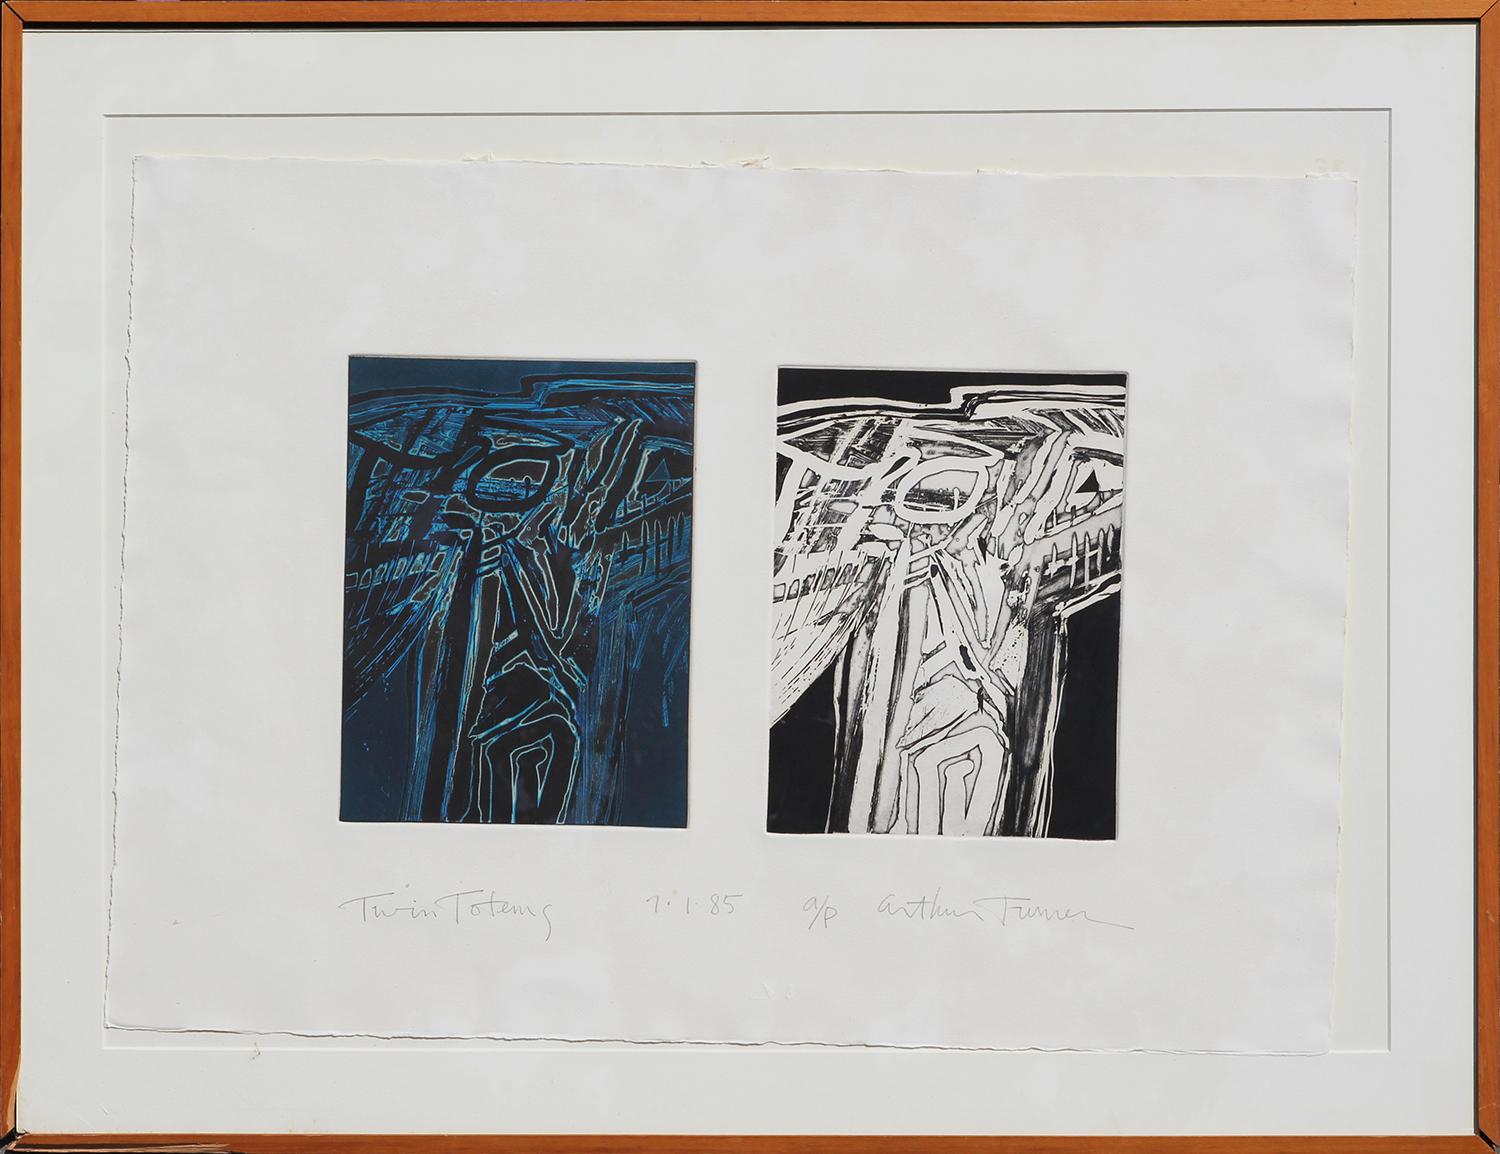 Arthur Turner Abstract Print - "Twin Totems" Blue and Black Double Abstract Figurative Prints 